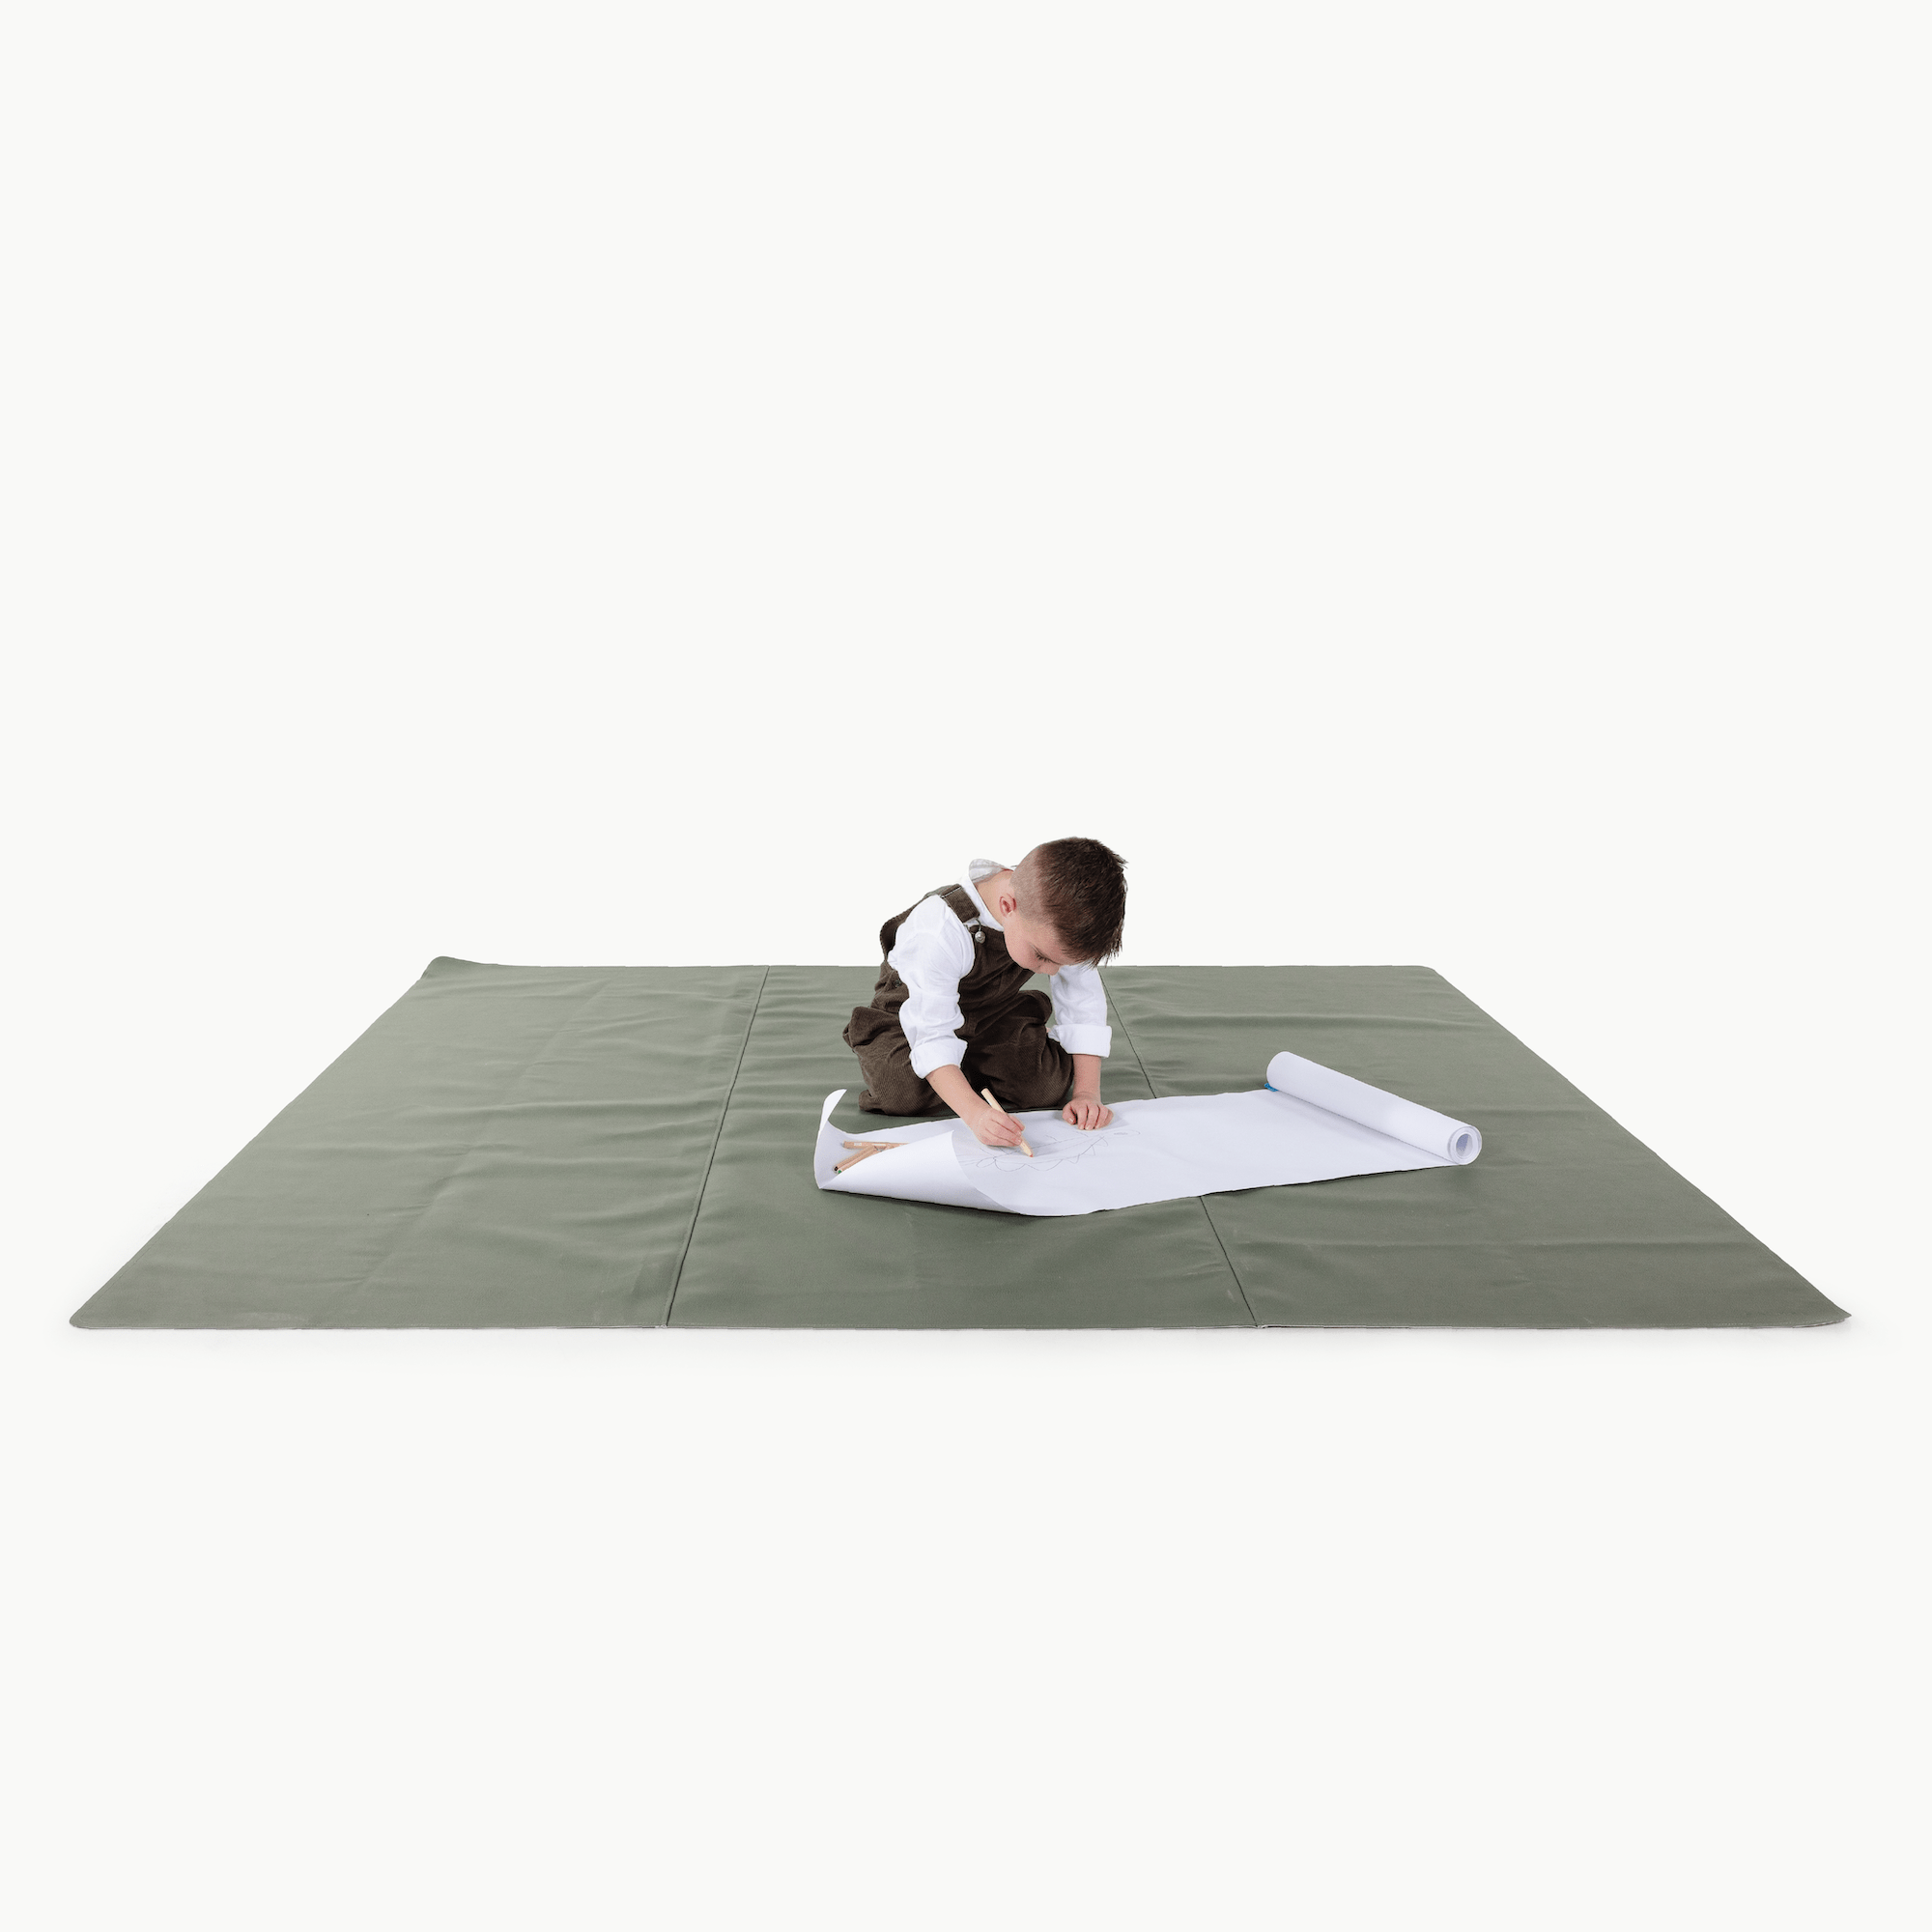 Thyme / Square@Kid playing on the Thyme Maxi Square Mat